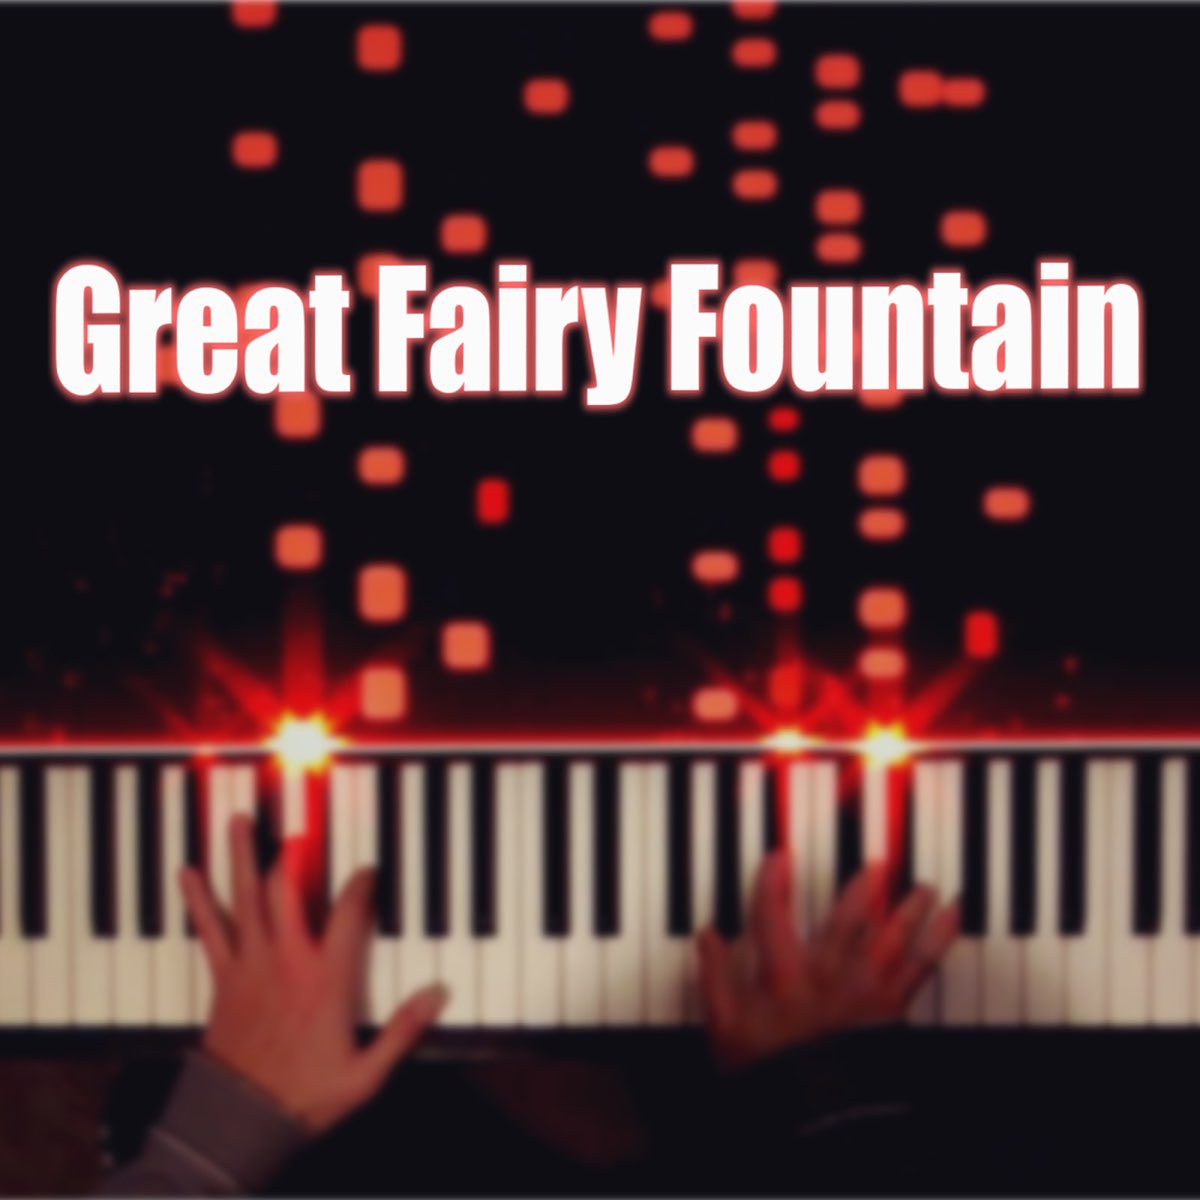 Great Fairy Fountain (From "the Legend of Zelda") [Piano Etude] - Single by  Erik Correll on Apple Music